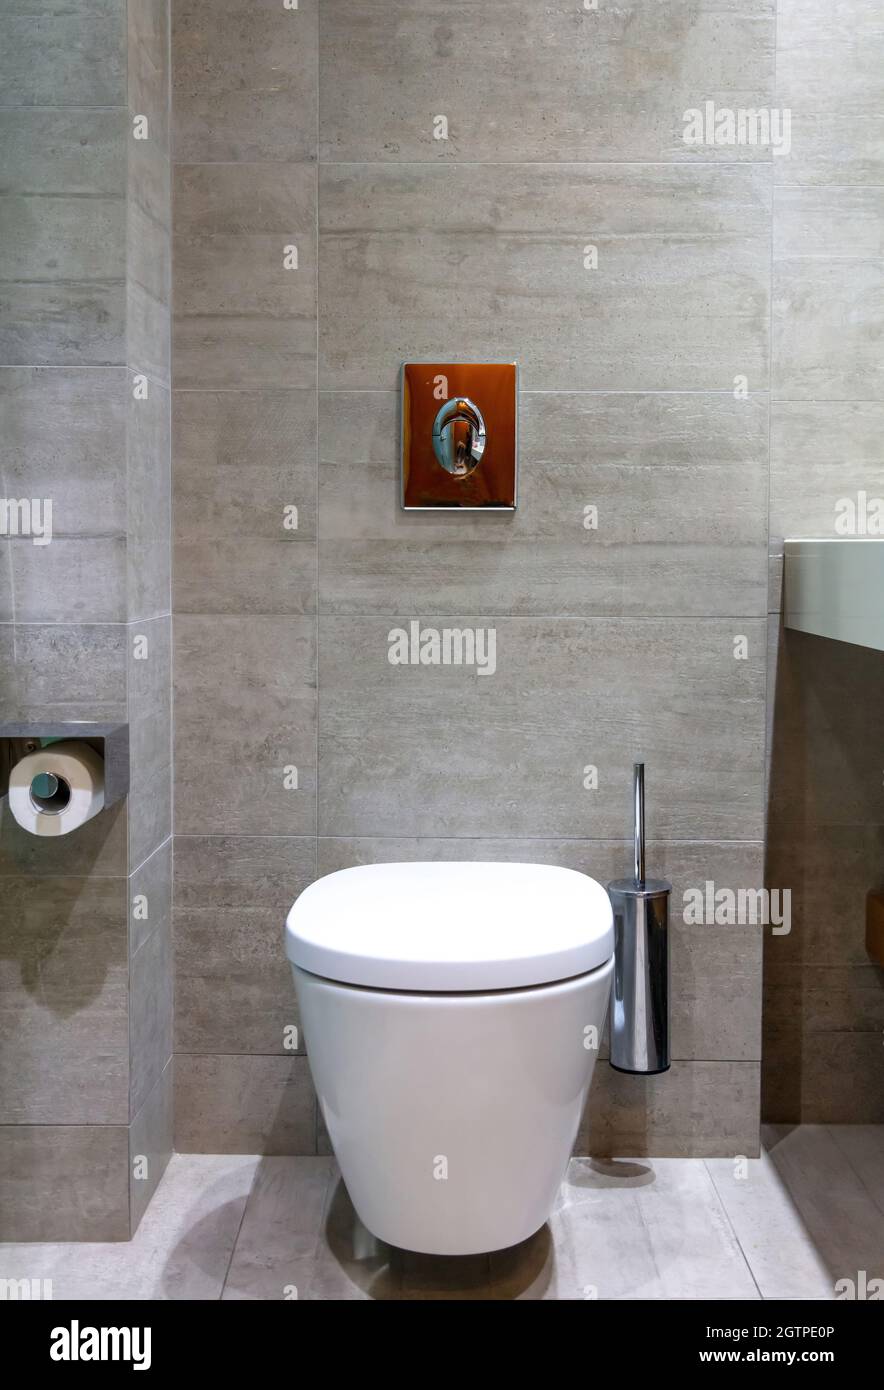 Modern toilet interior design, hanging toilet bowl, brush and flush button. Luxury lavatory accessories on marble tiled walls and floor light gray col Stock Photo